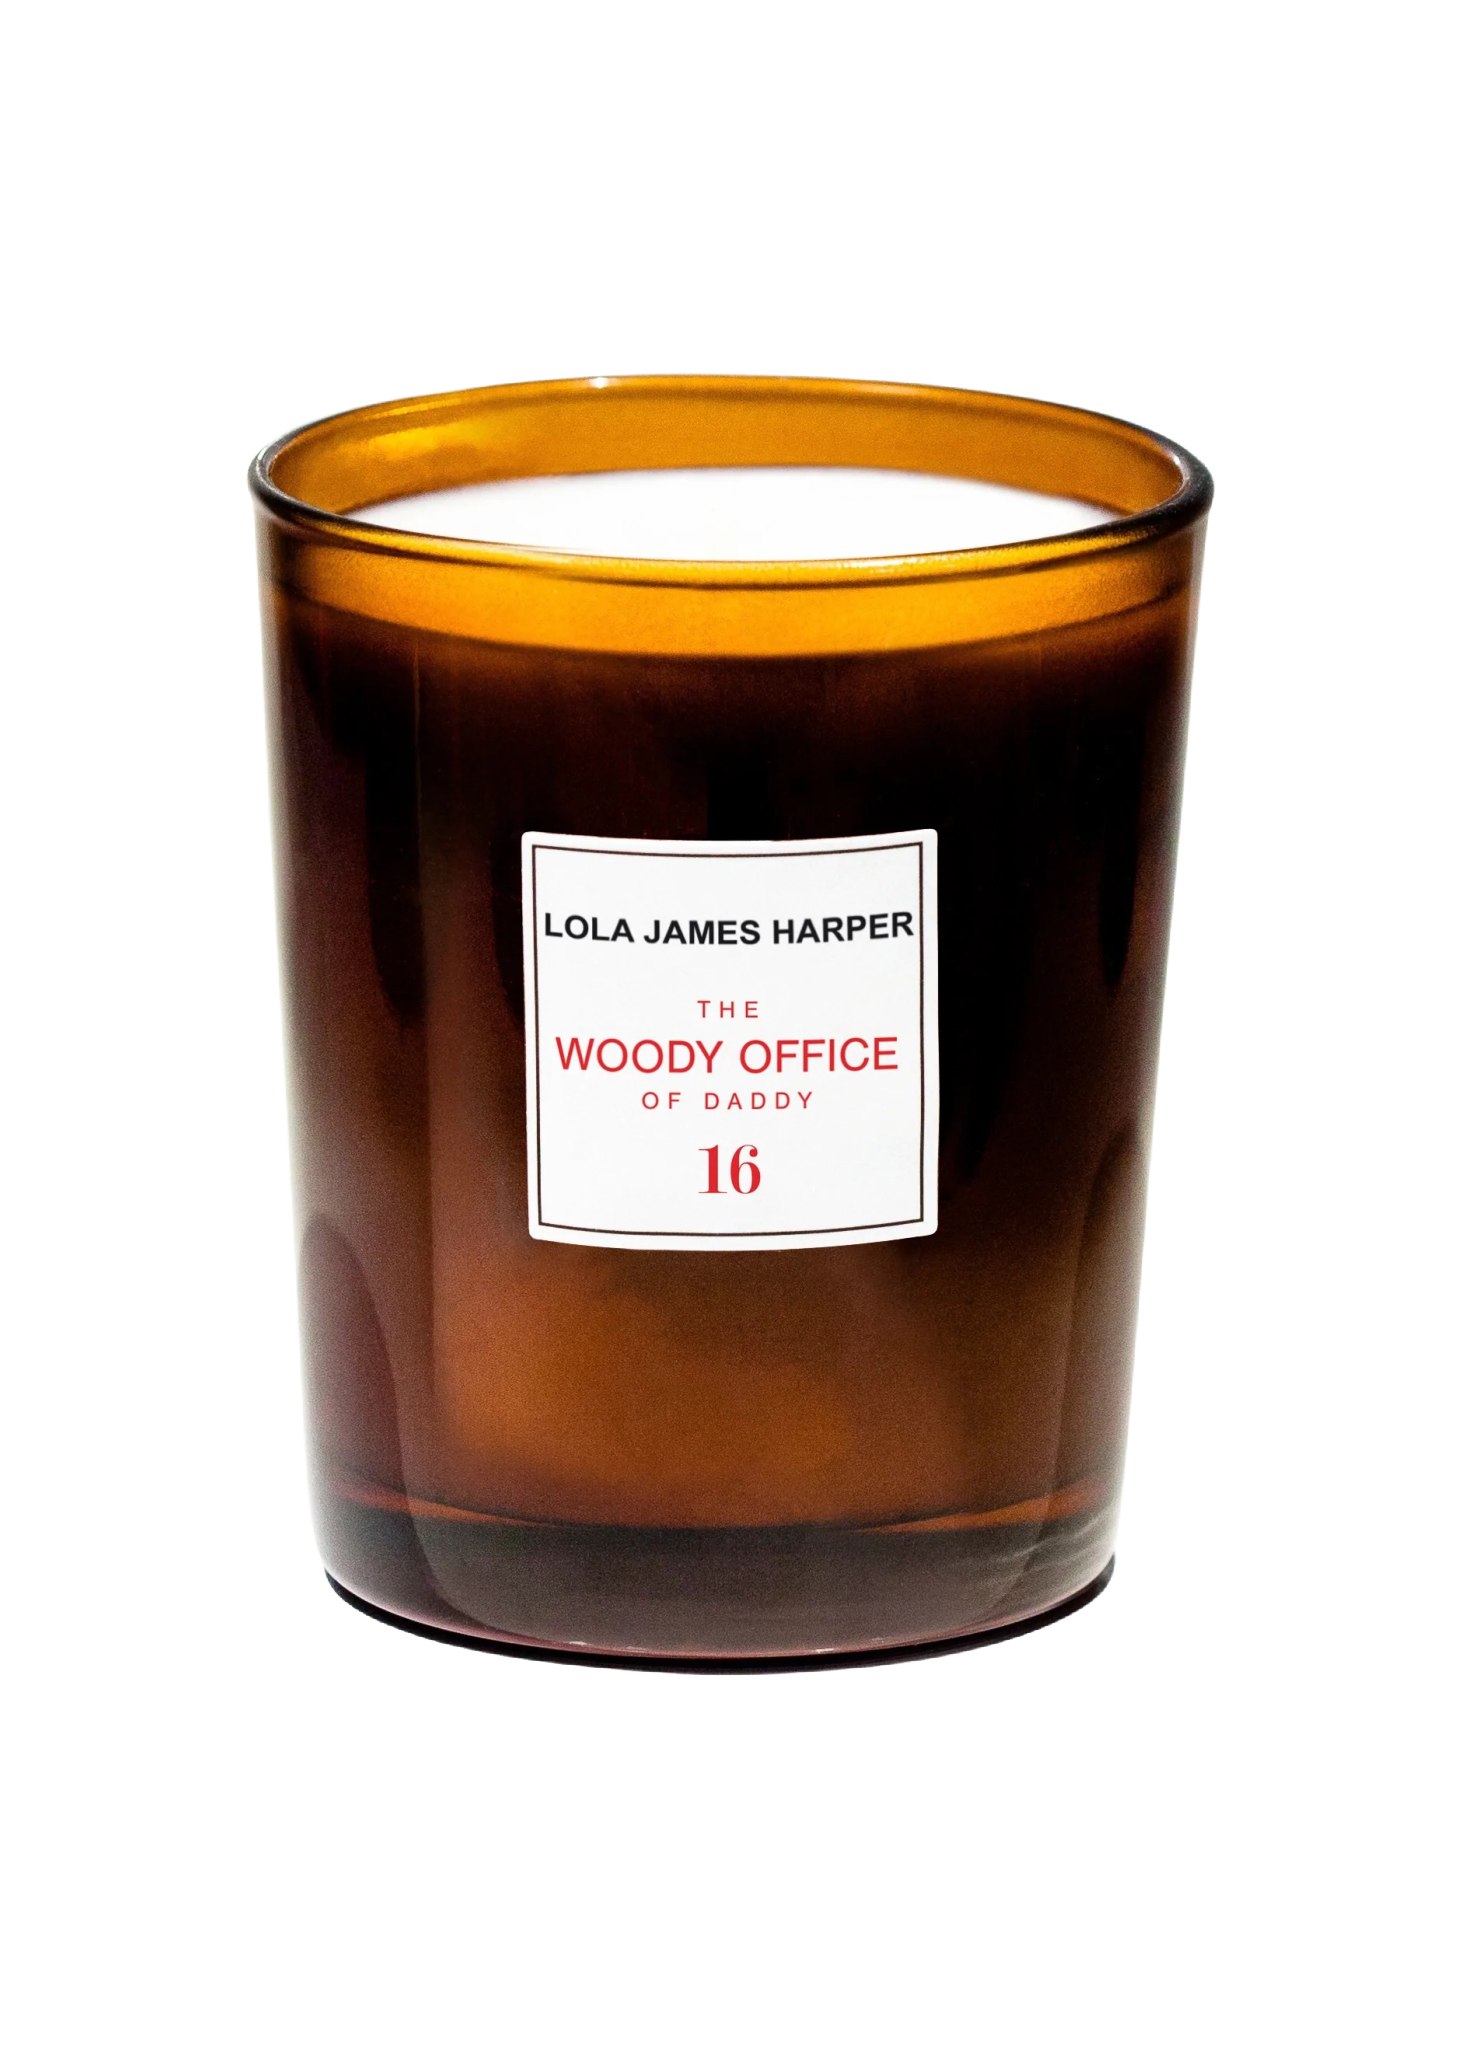 Lola James Harper Candle 16 The Woody Office in Mahogany Wood, Sandalwood